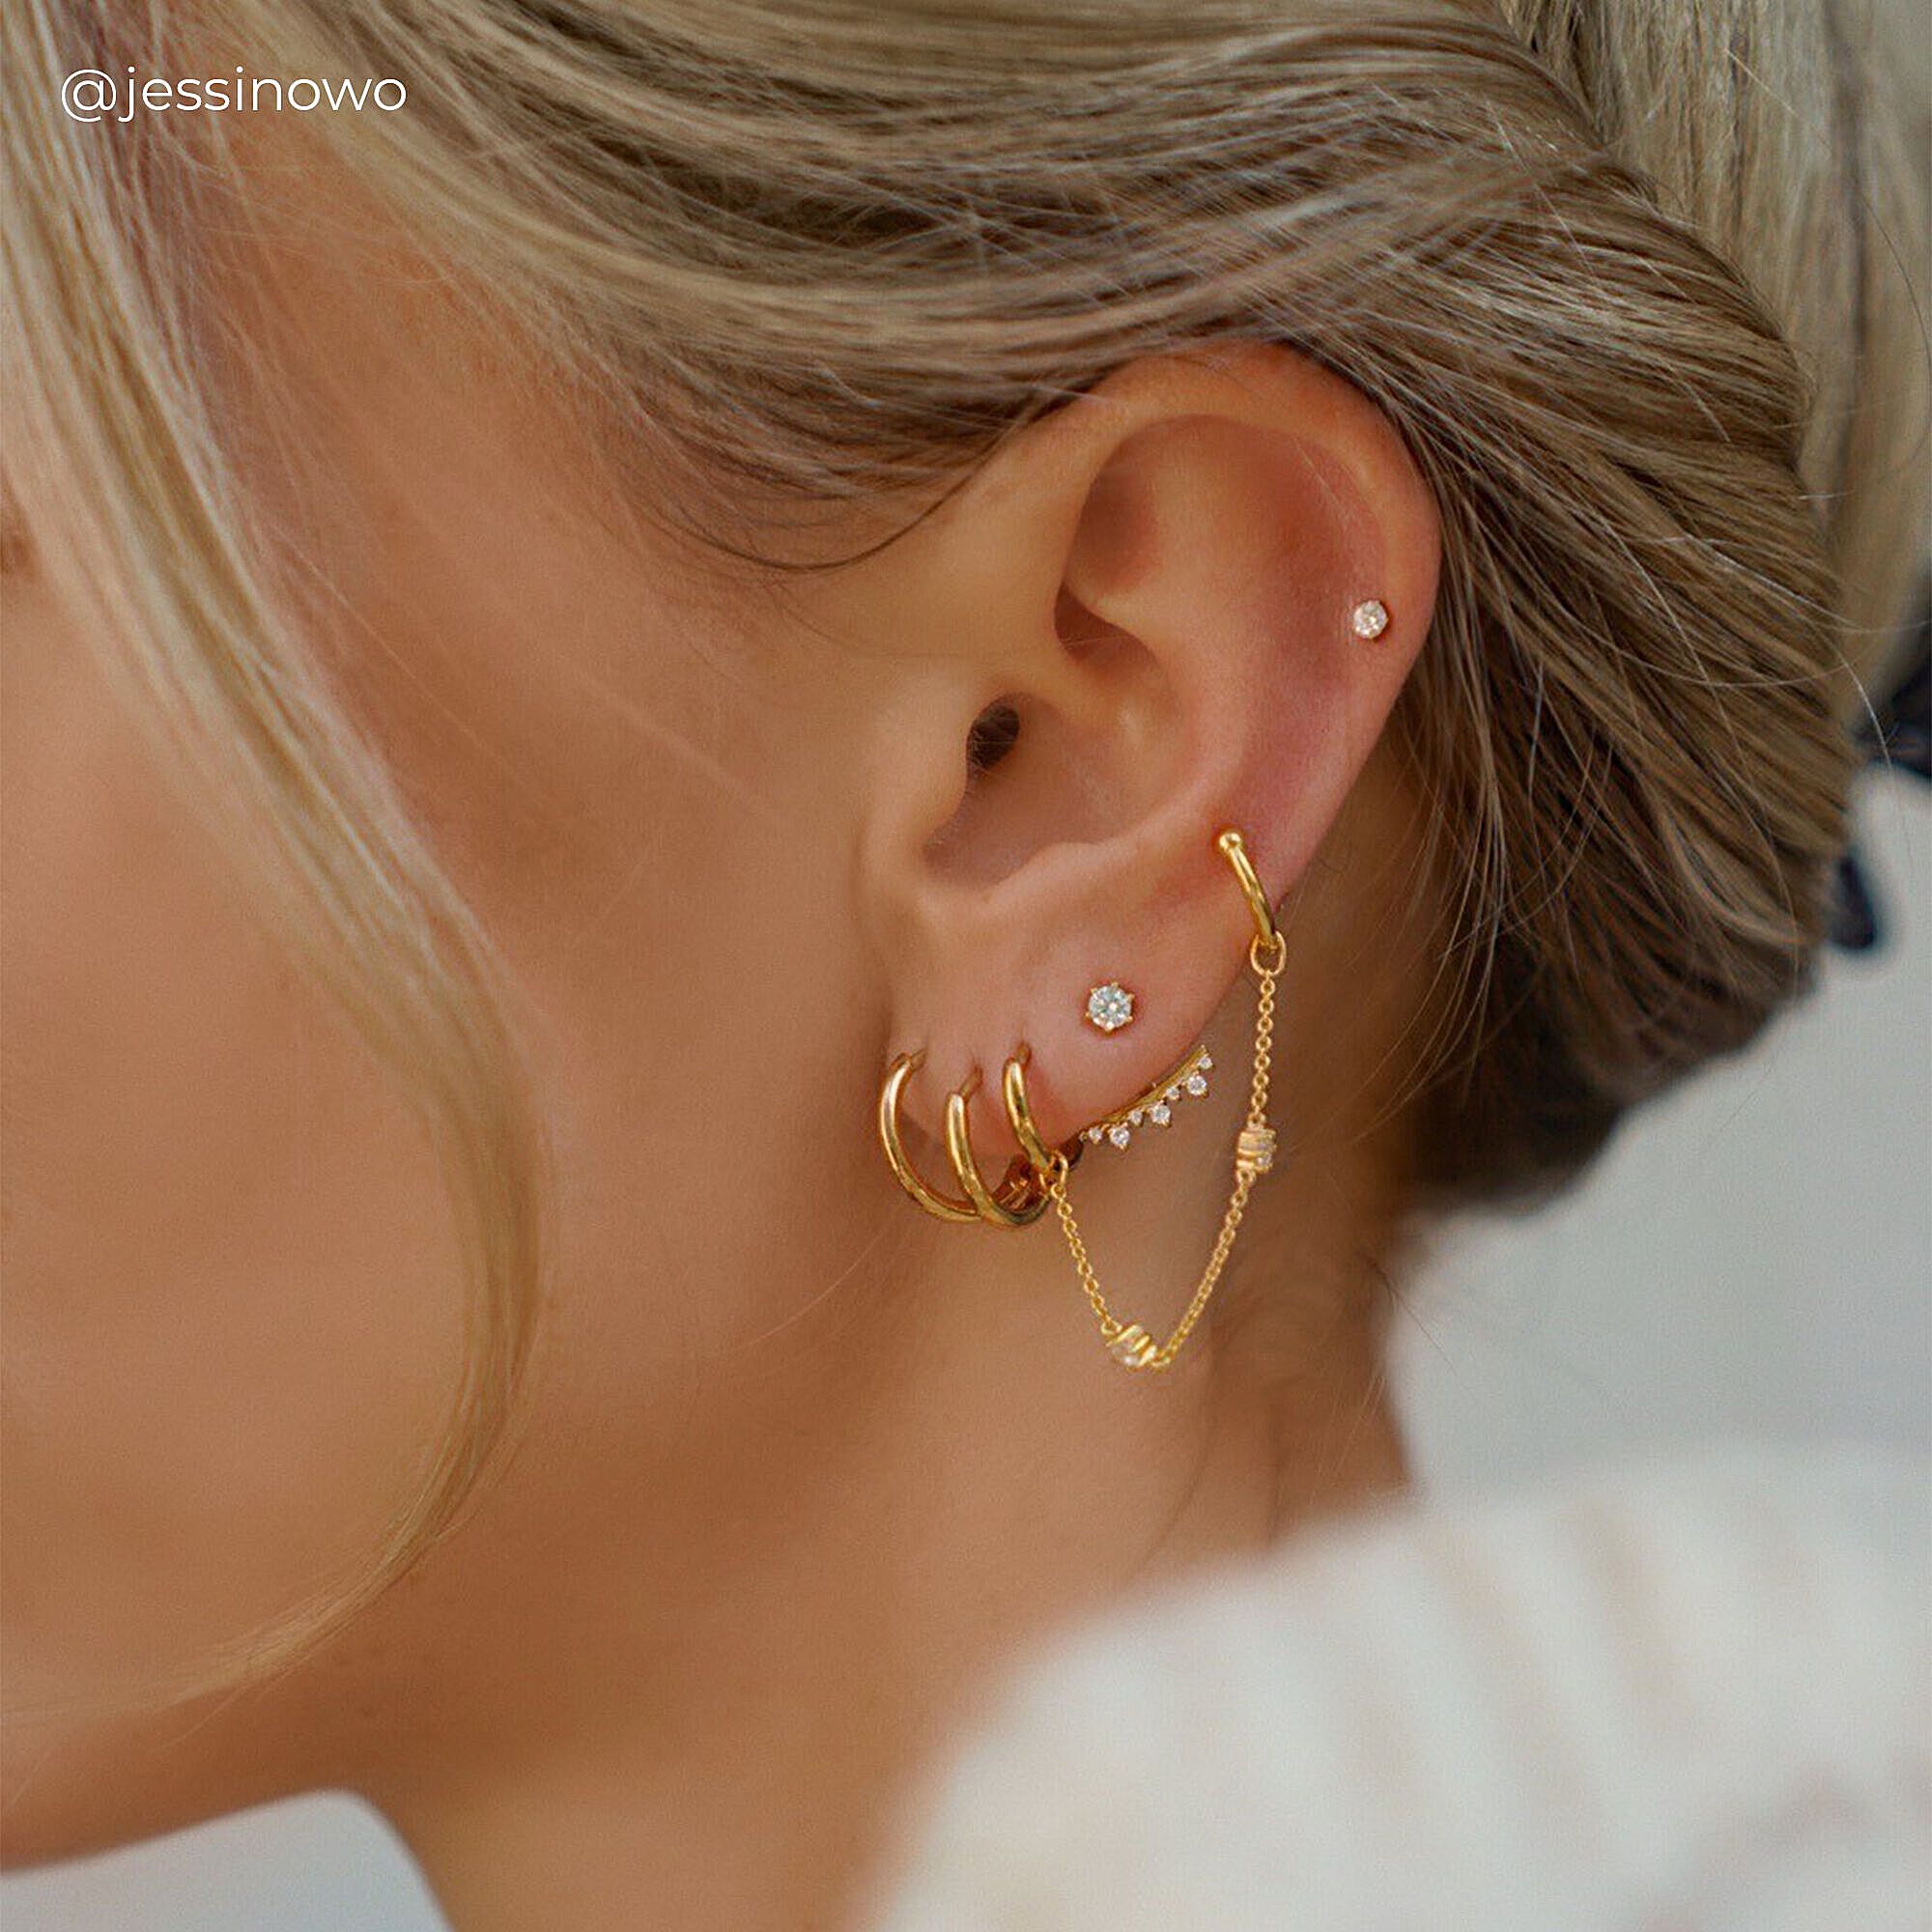 Ear stud │ in zirconia centrepiece THOMAS SABO with gold